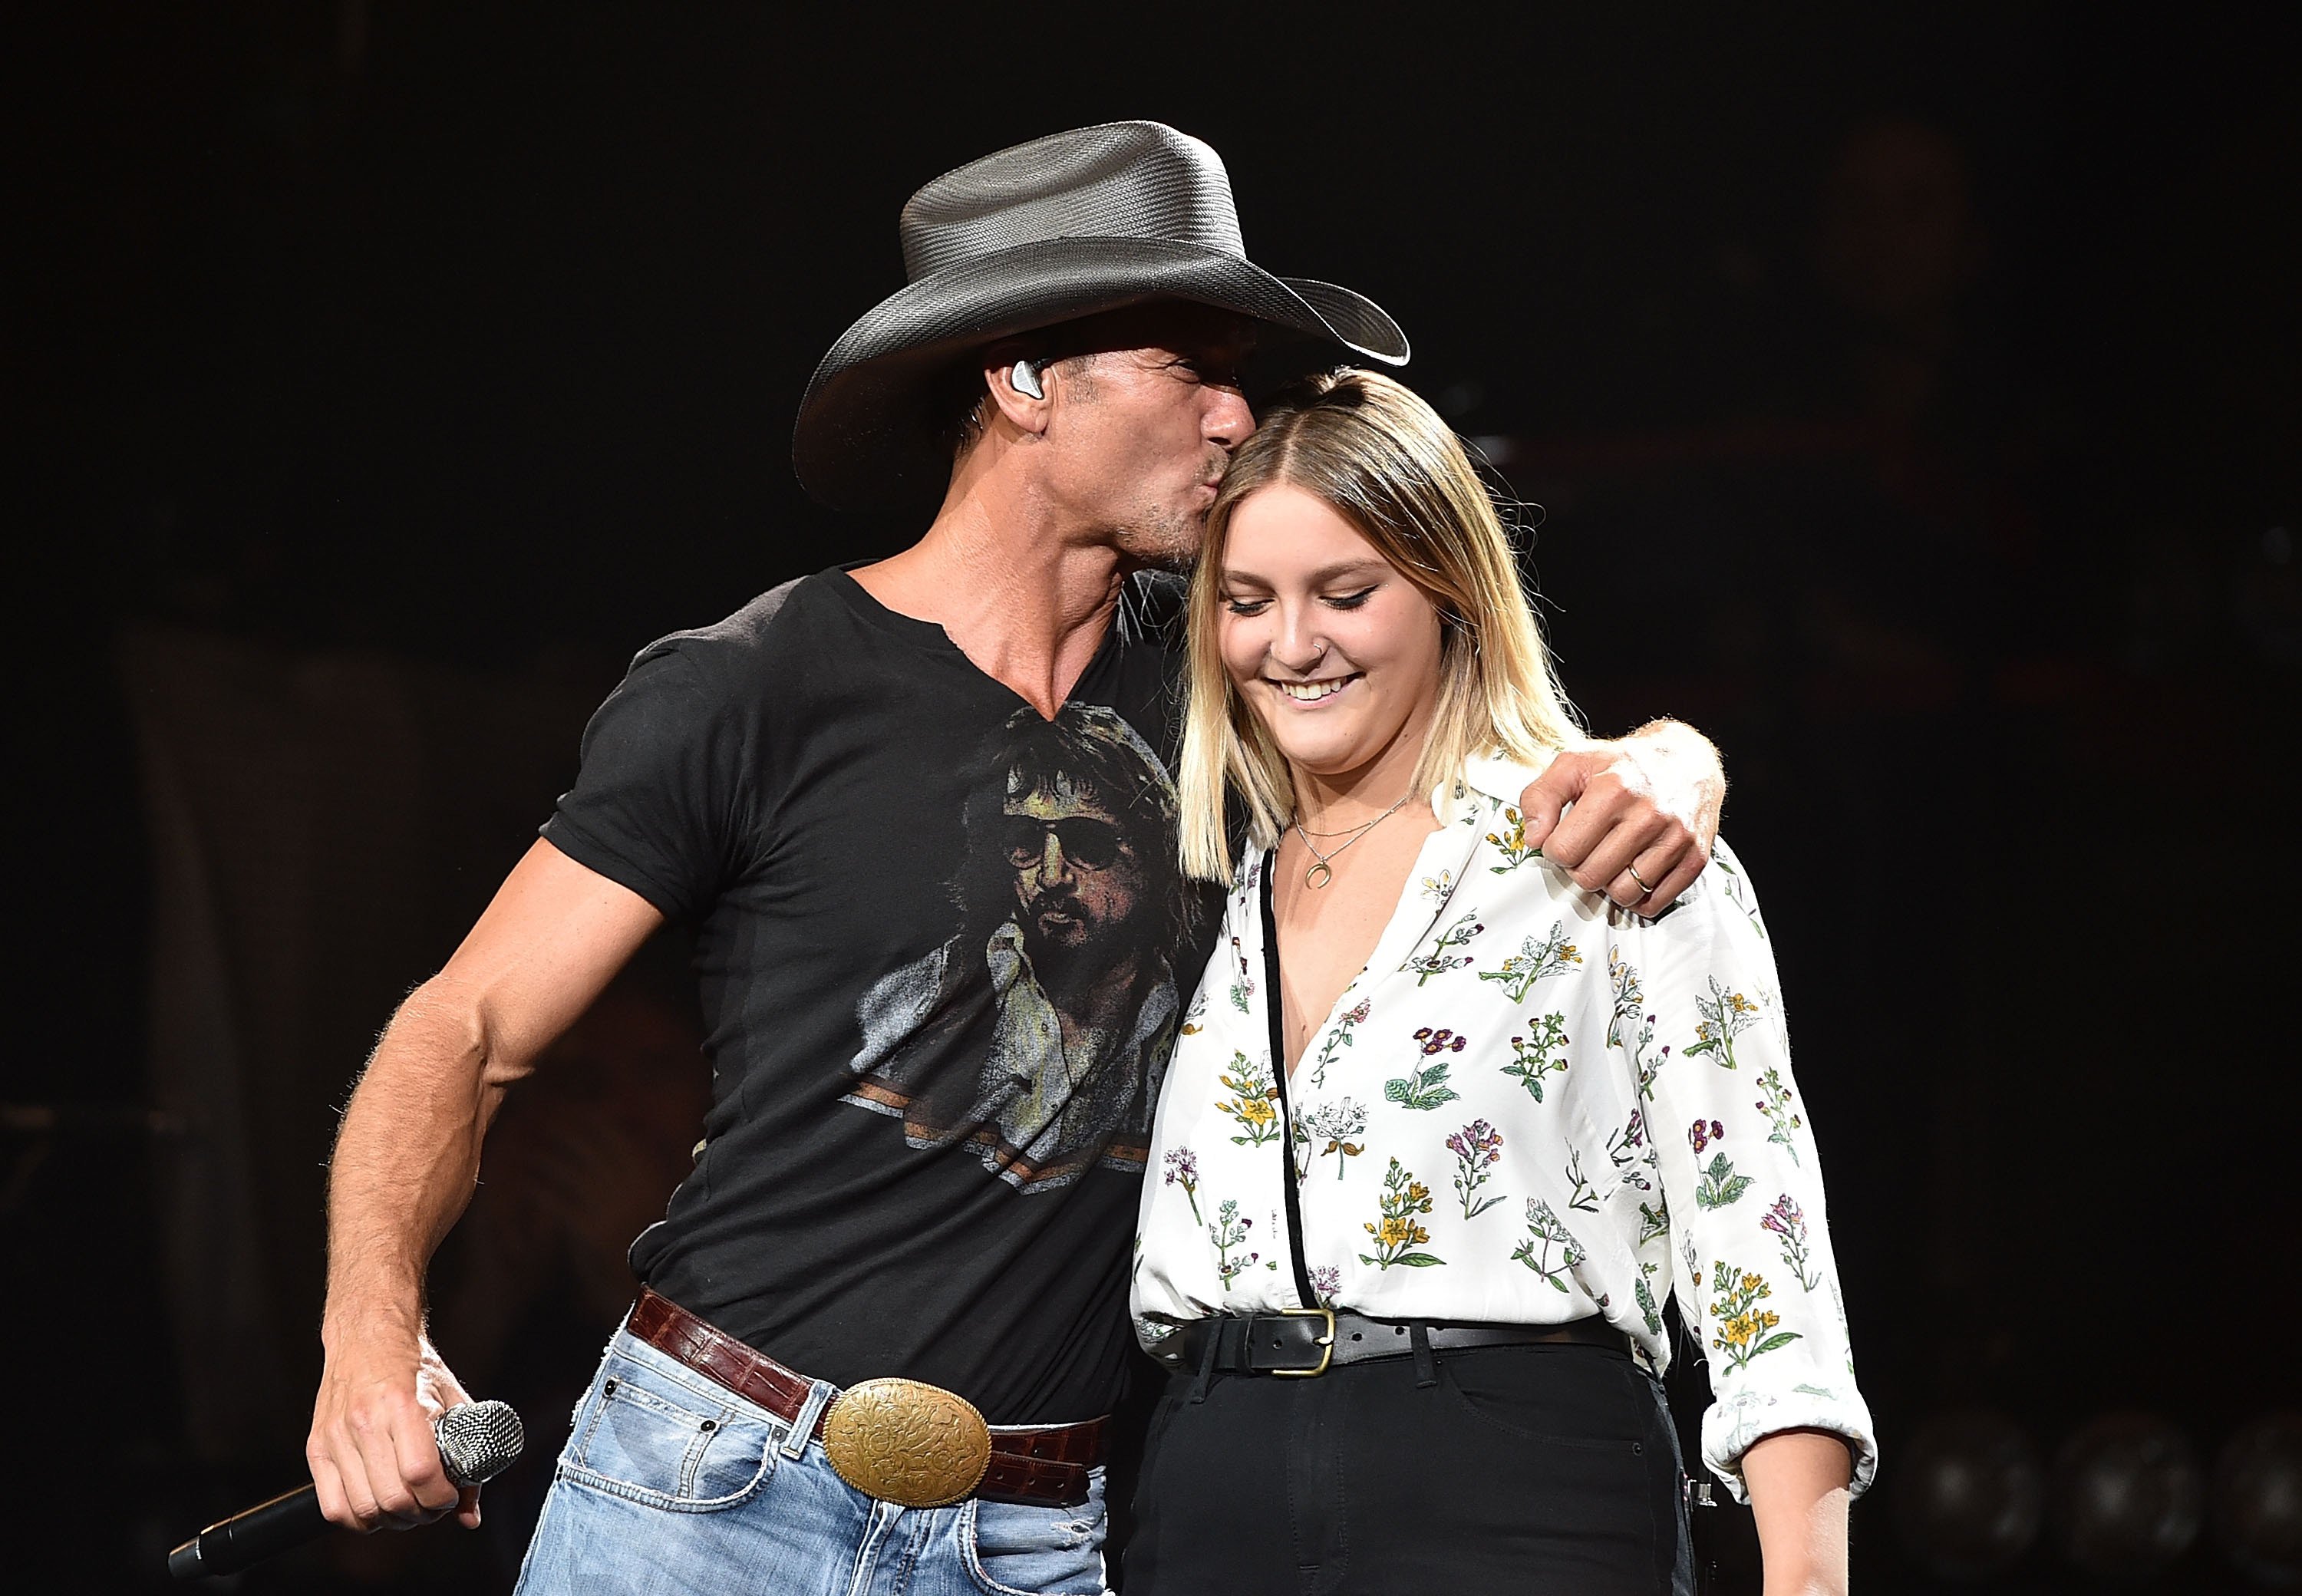 Tim McGraw performs with daughter Gracie during his "Shotgun Rider" tour in Nashville, Tennessee on August 15, 2015 | Photo: Getty Images